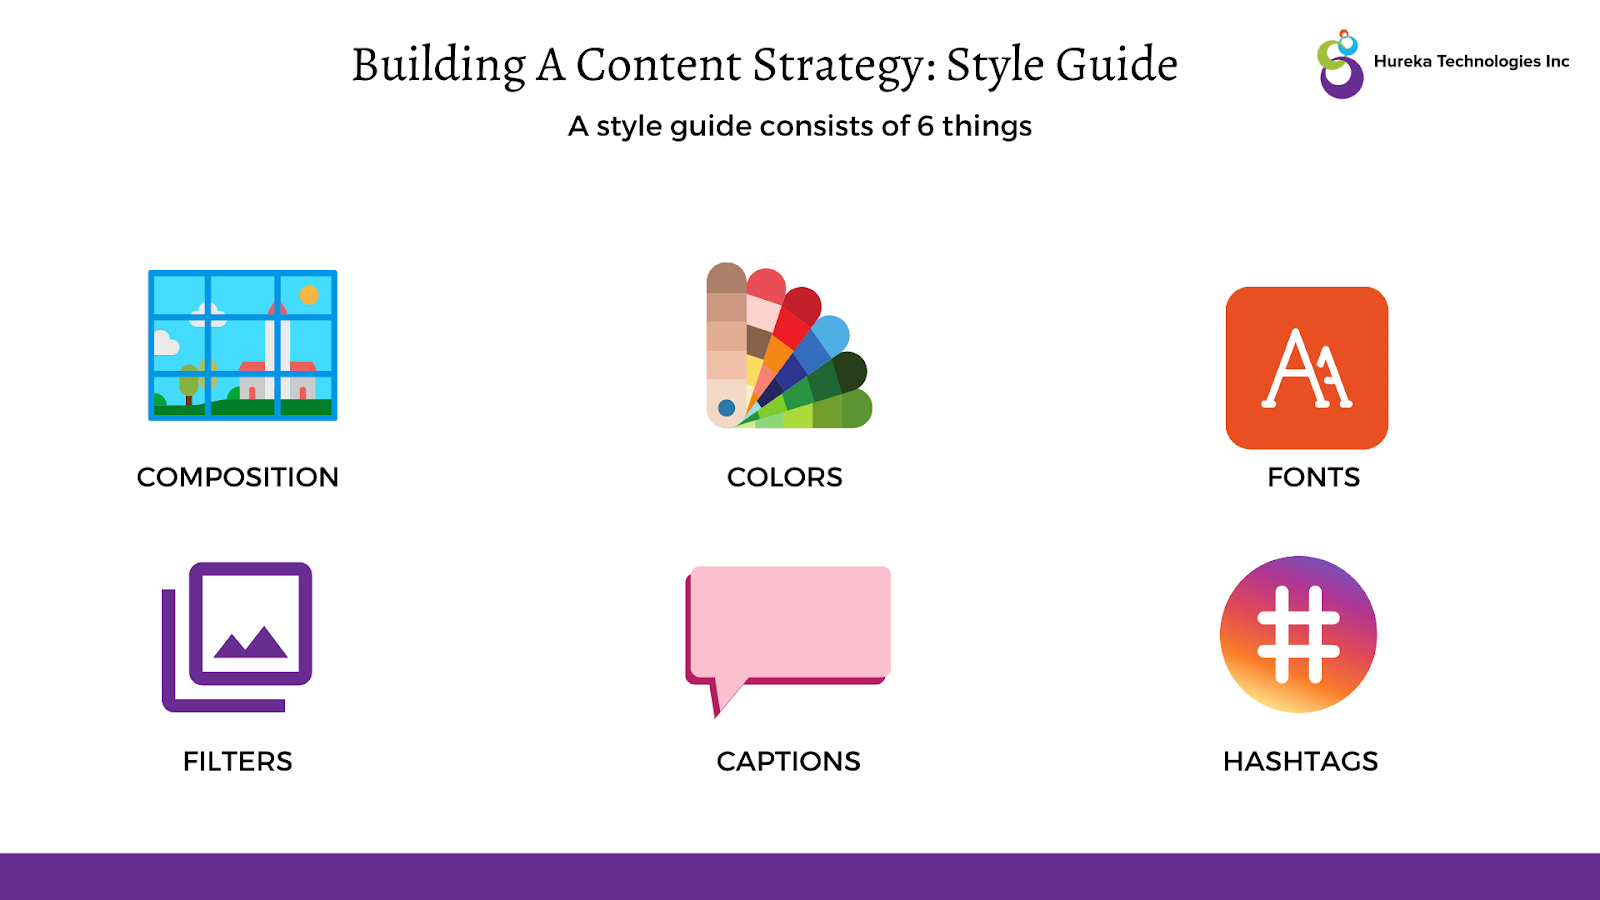 Illustration describing key elements a style guide in a content strategy must have 